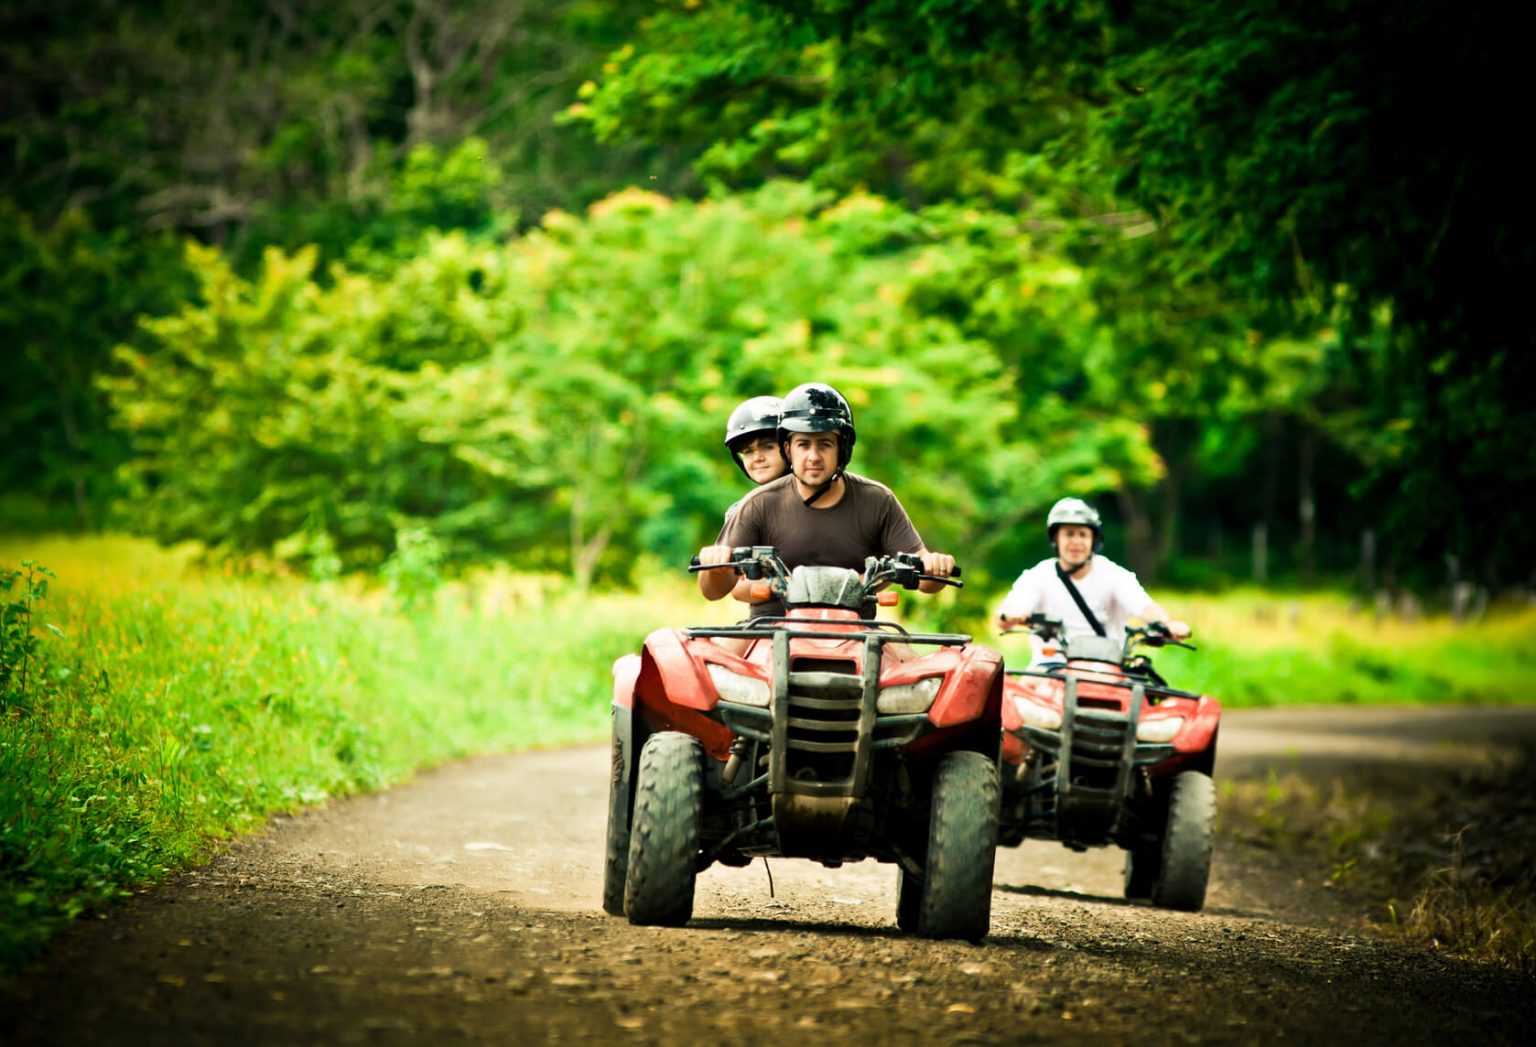 Two ATV riders with one passenger.